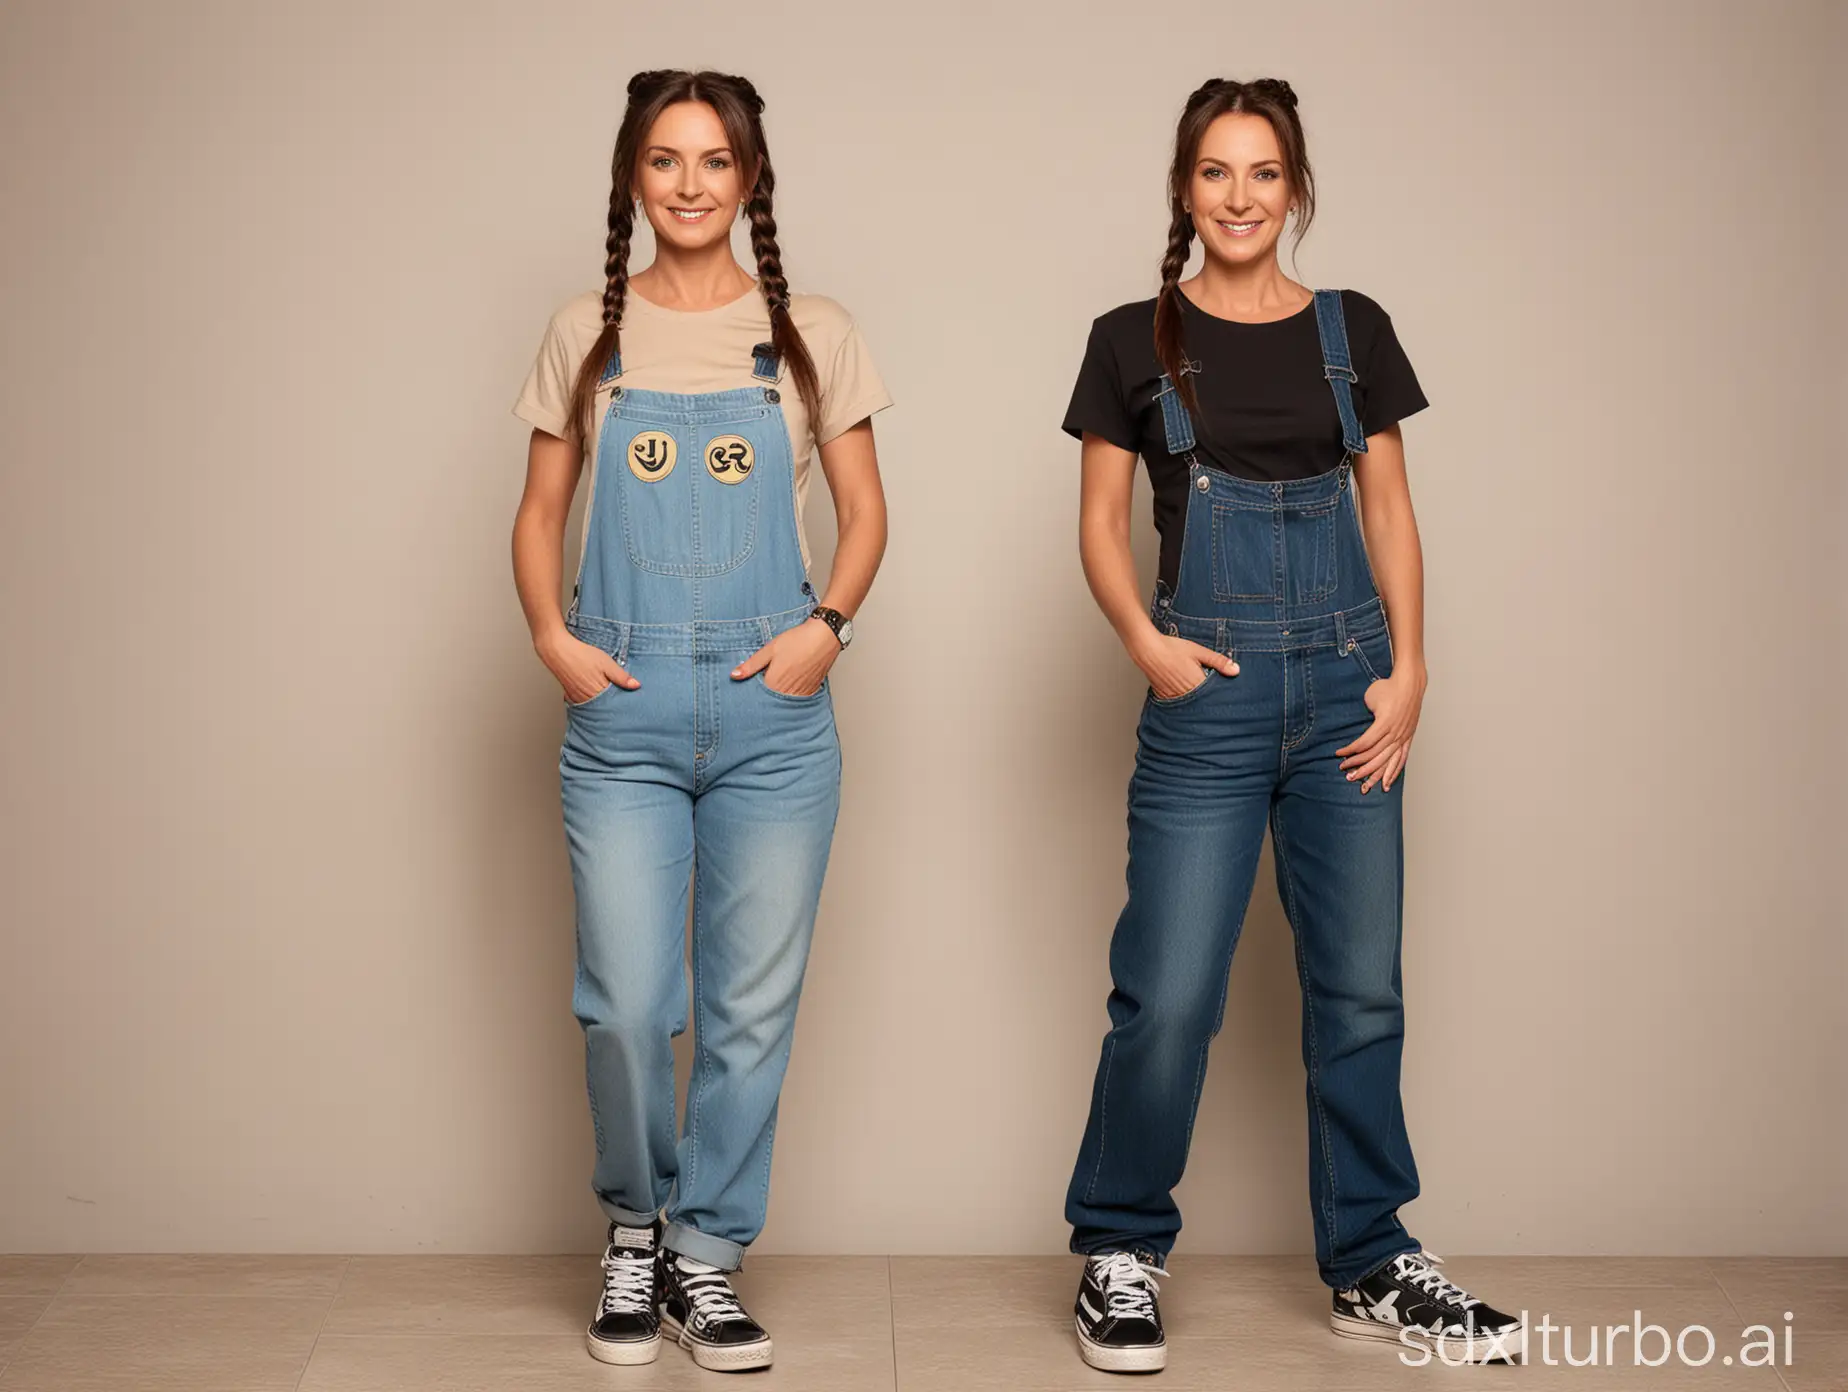 A cool romanian woman; 52 years old, green eyes, wearing a pair of long pigtails with dark brown locks, dressed in a light beige T-shirt adorned with a teenager symbol , jeans overalls, wearing black sneakers witha smile in a full body standing photo.